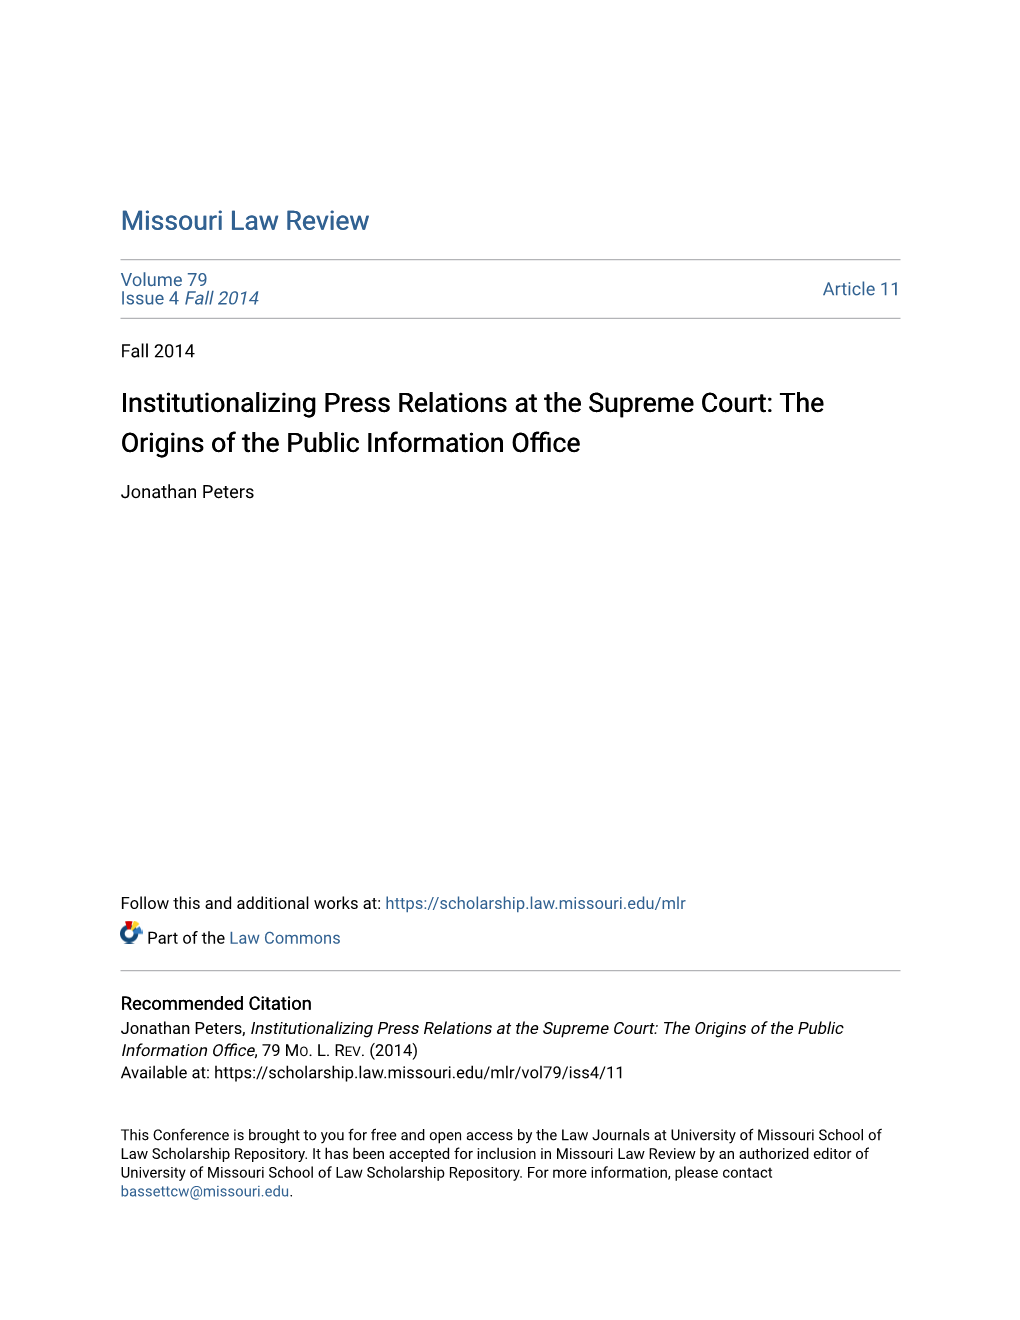 Institutionalizing Press Relations at the Supreme Court: the Origins of the Public Information Office